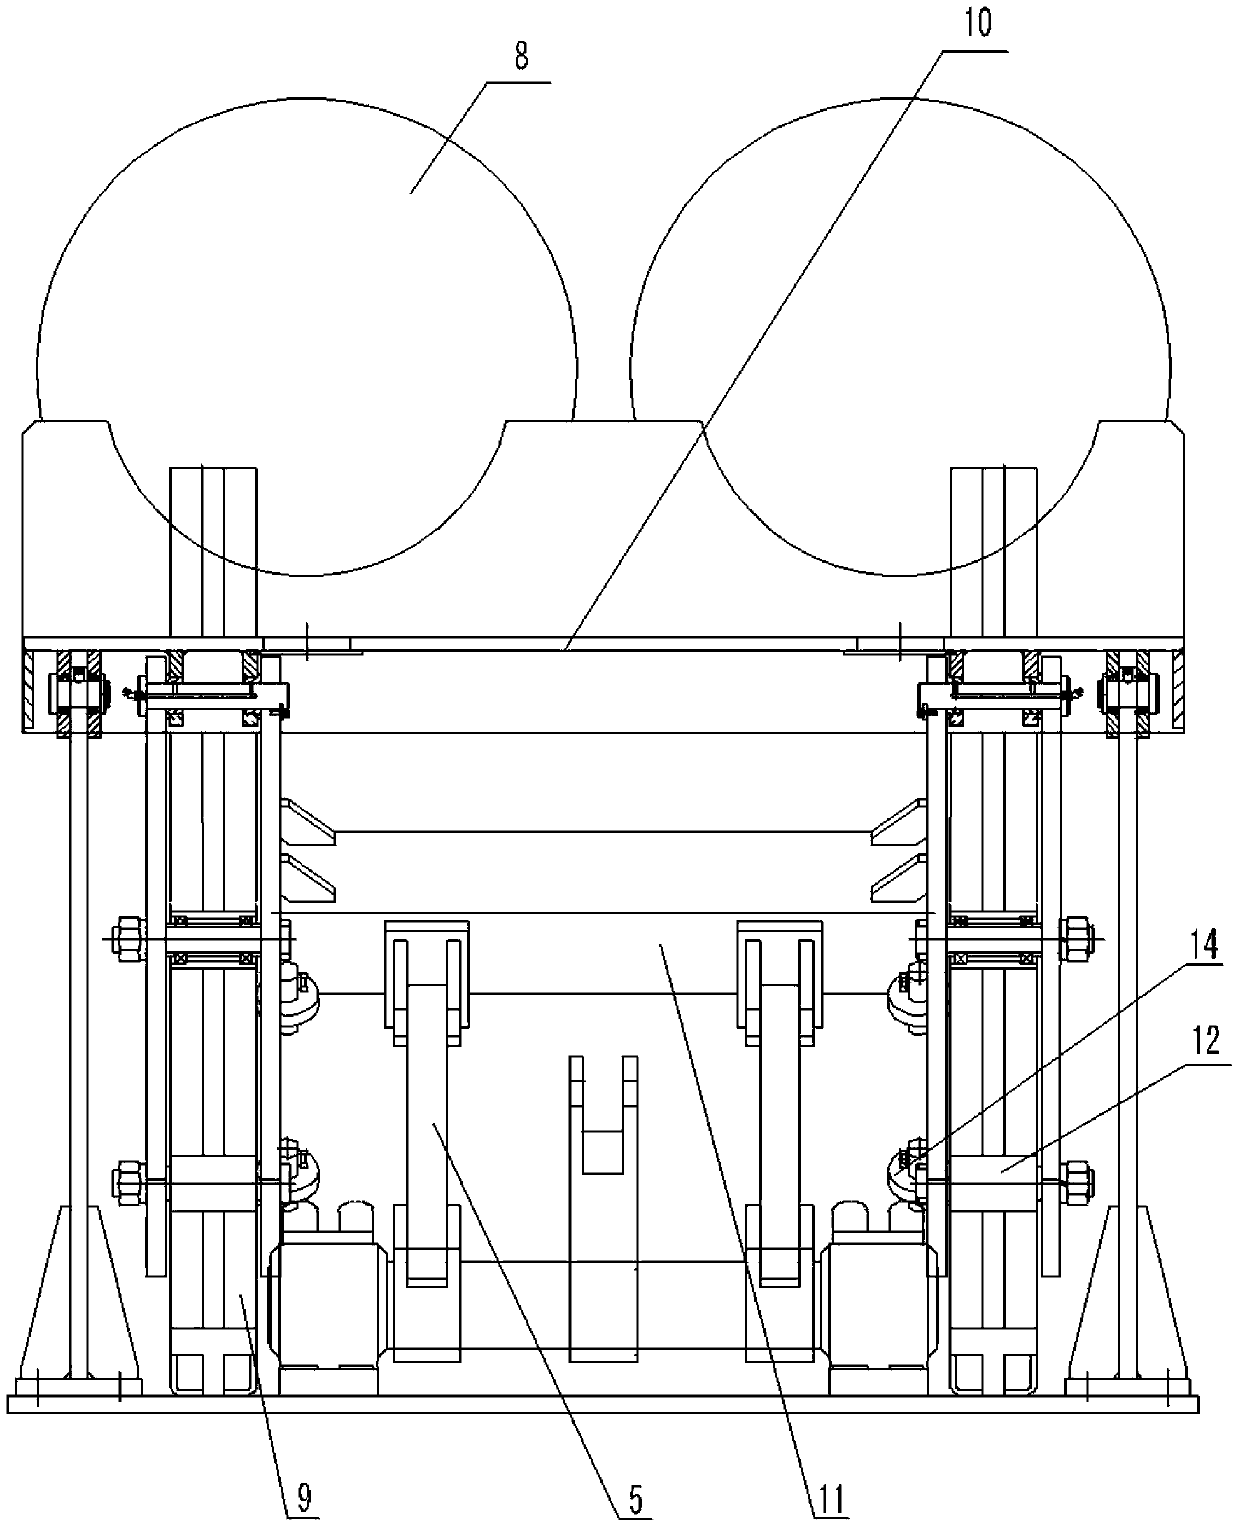 Lateral-bottom-fed coil loading machine with hydraulic rocker-slider mechanism